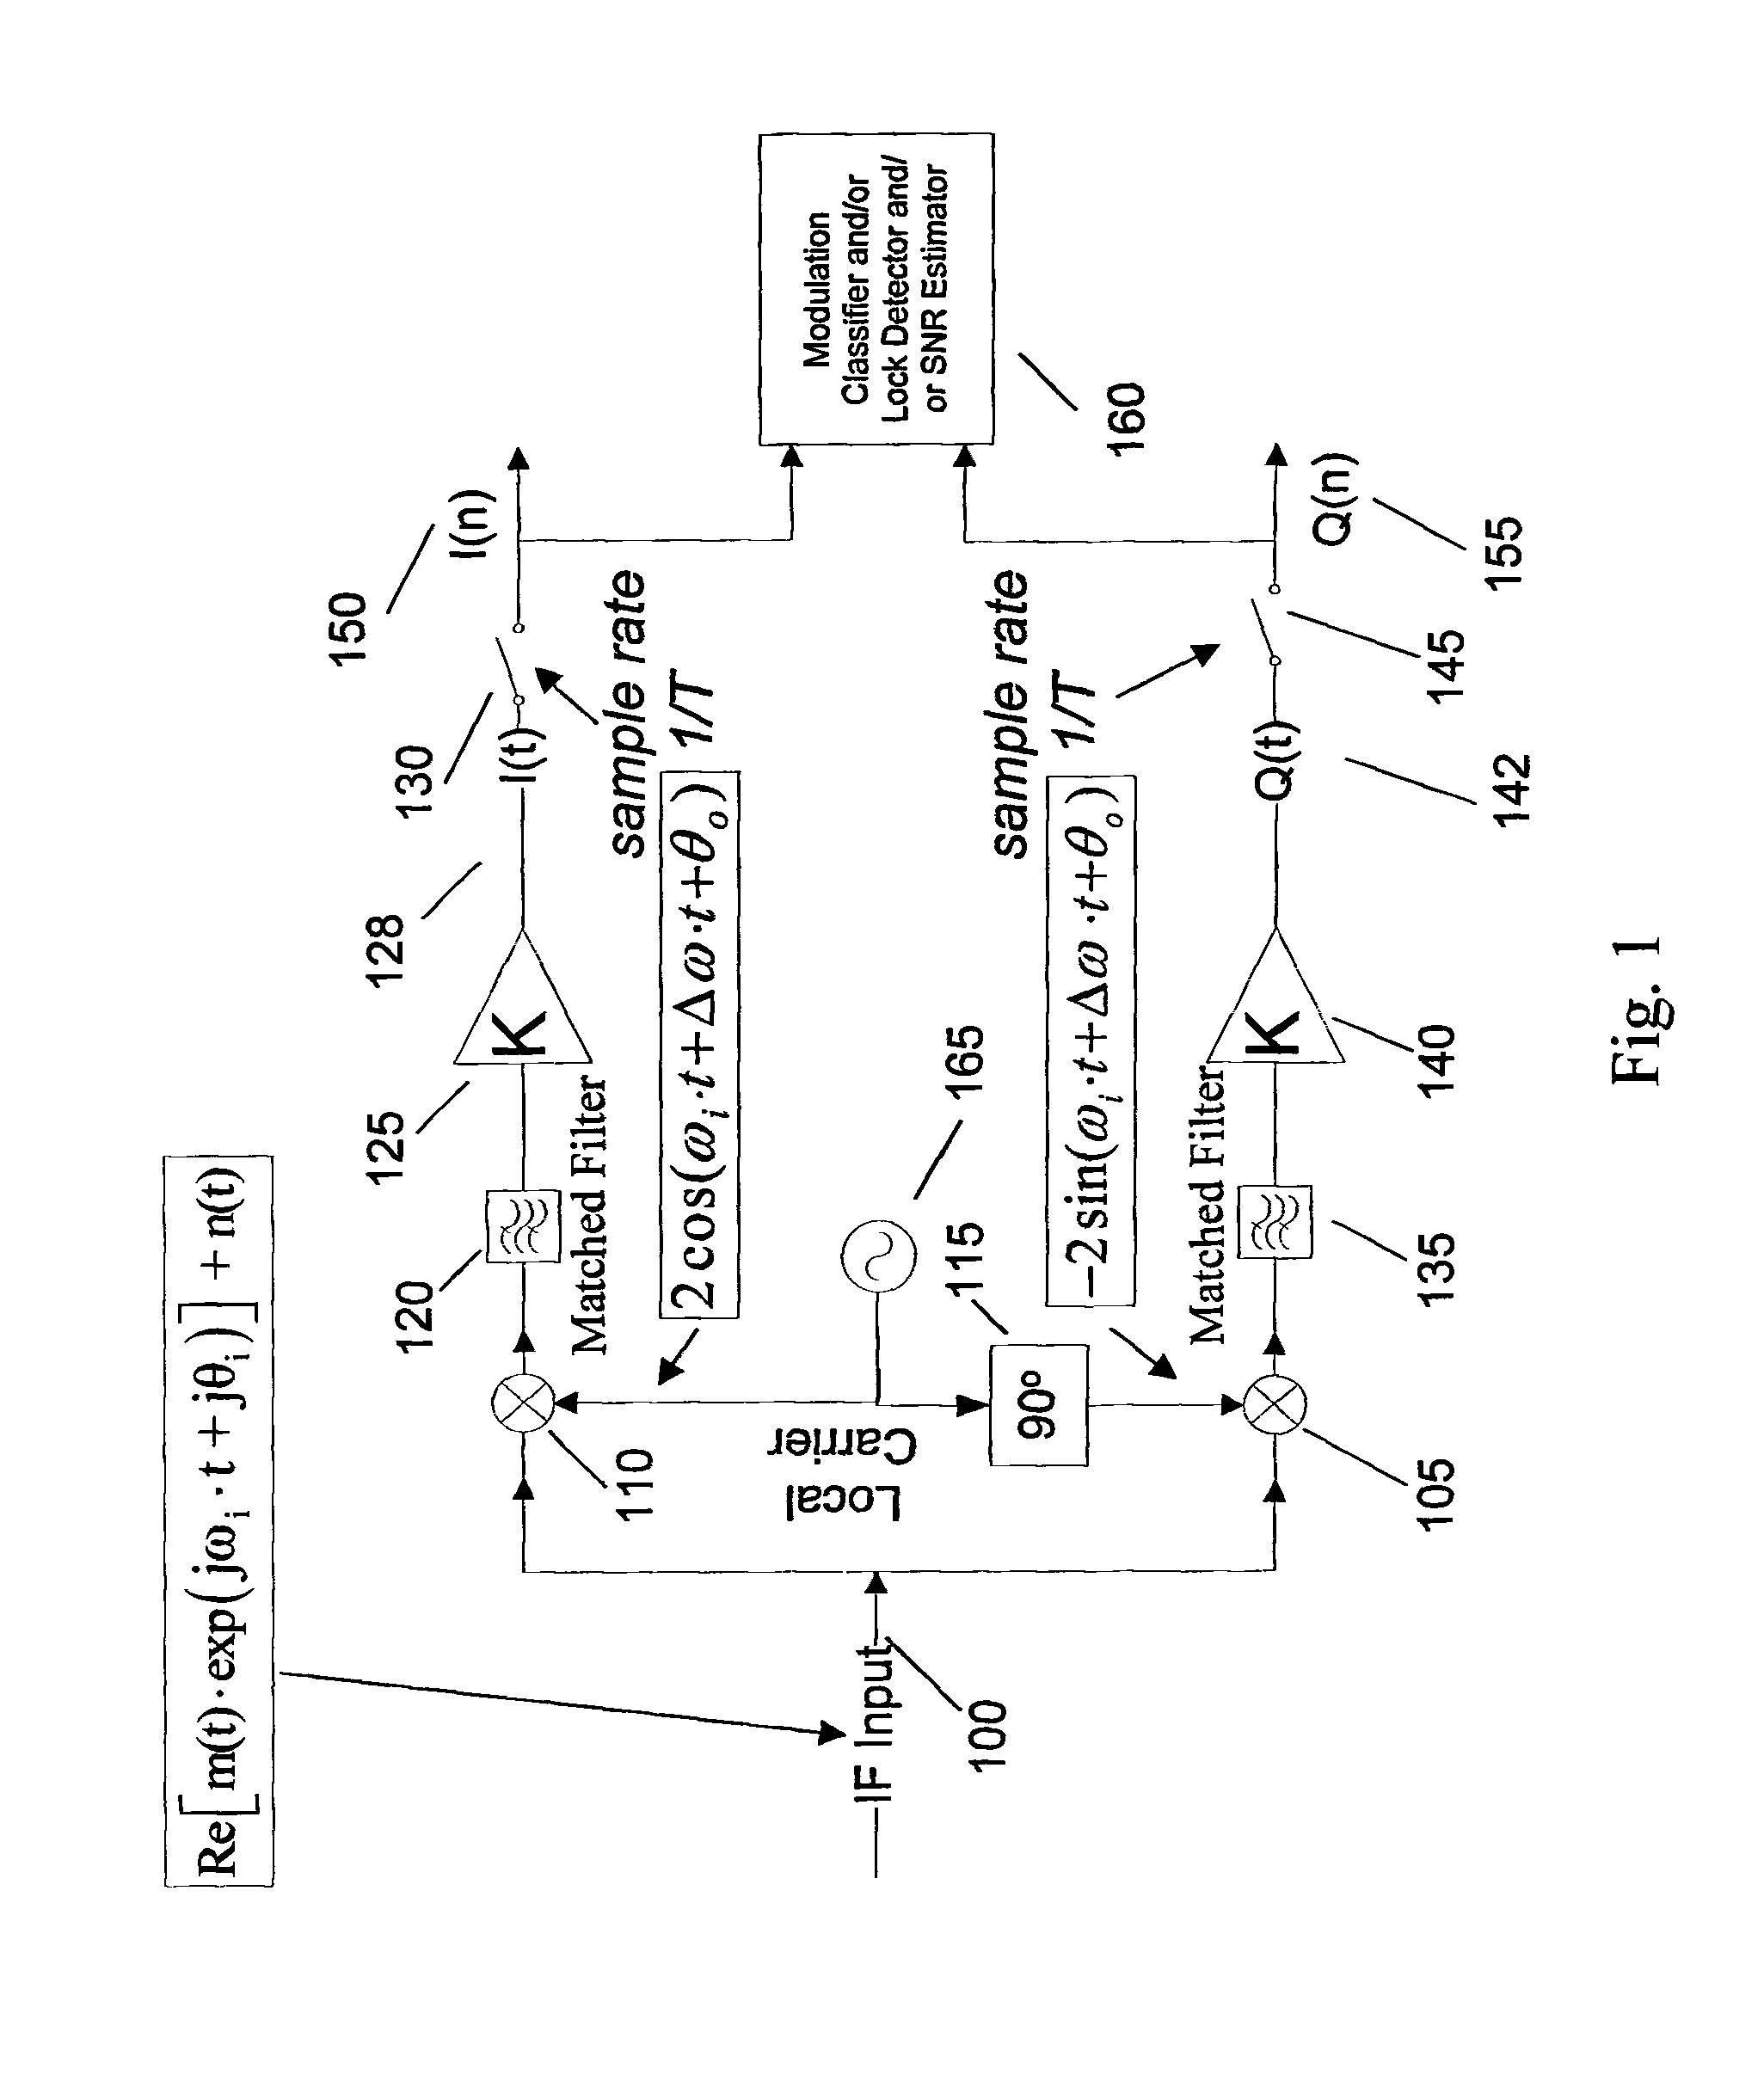 Method and apparatus for generating a metric for use in one or more of lock detection, snr estimation, and modulation classification